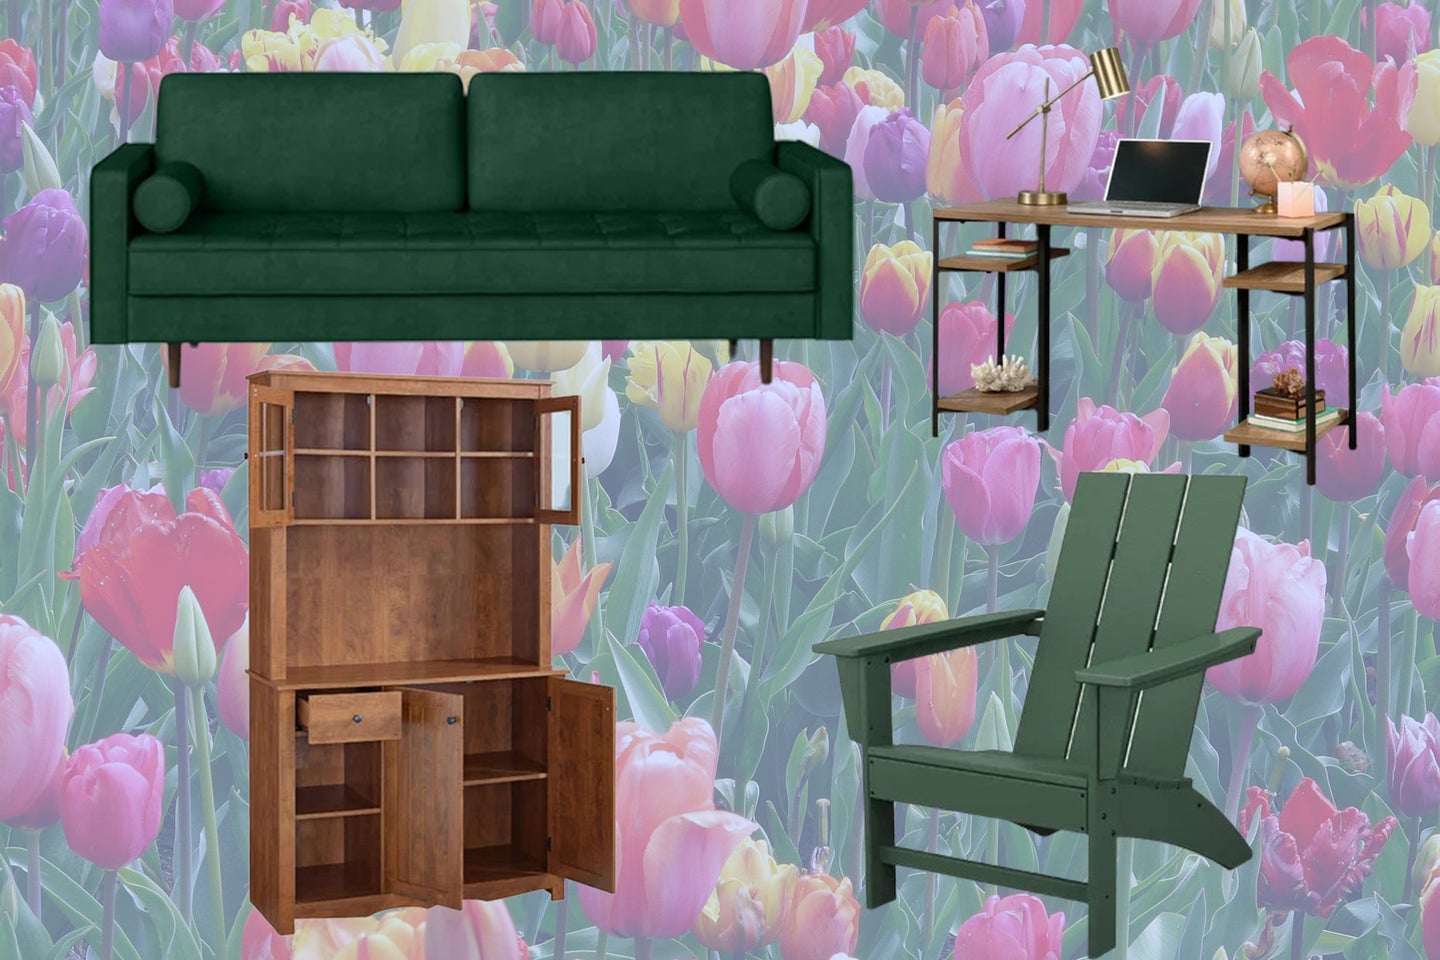 Furniture in front of tulips